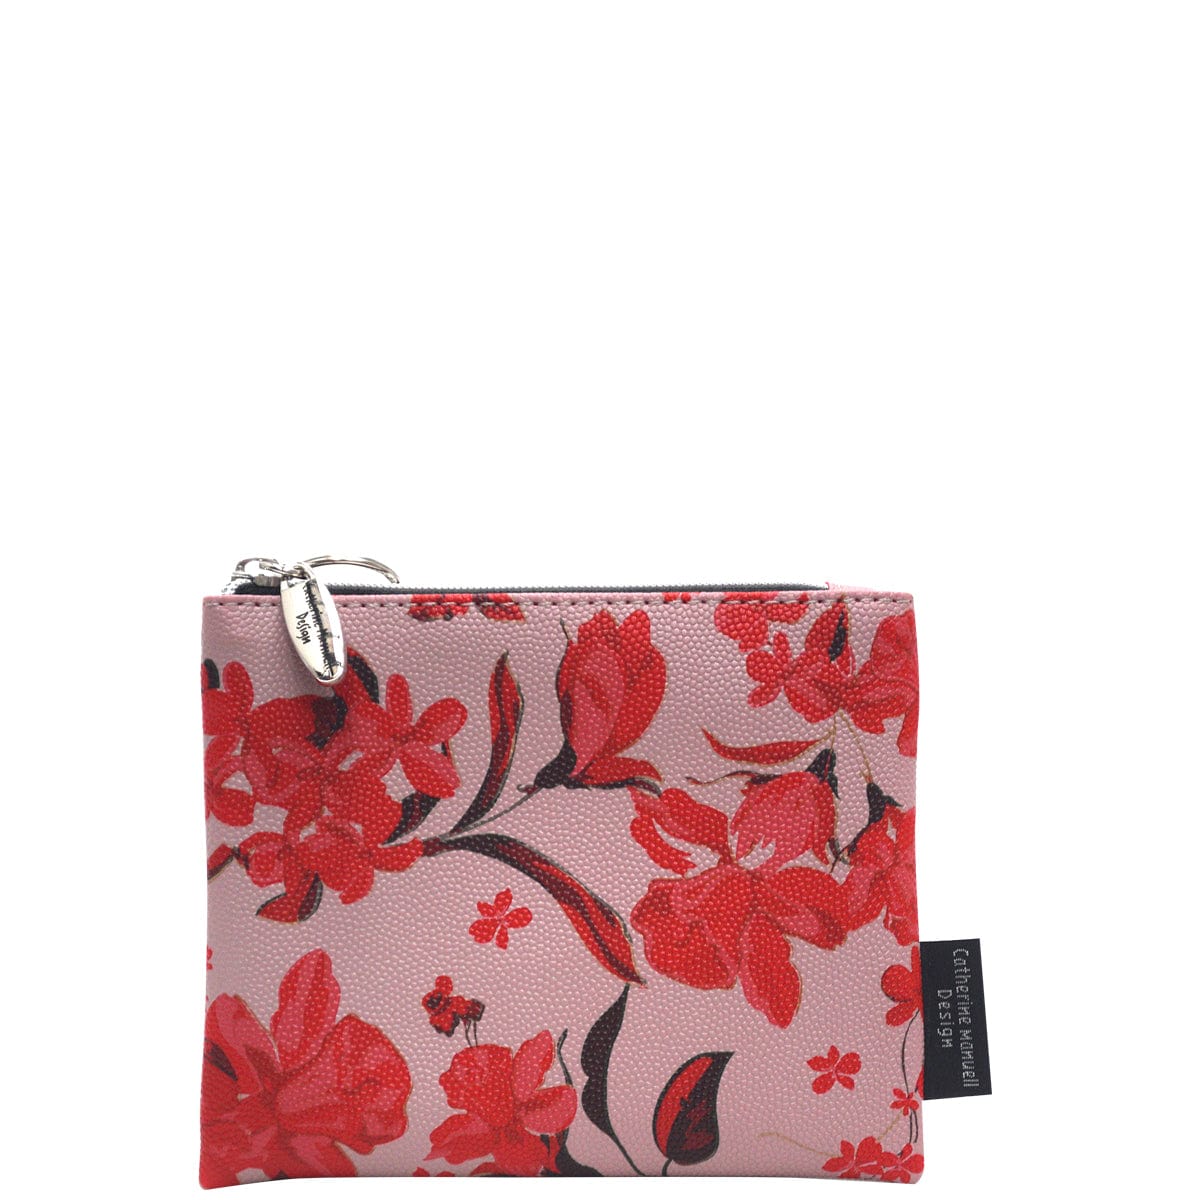 Everyday Purse - Iced Coffee Red Flower